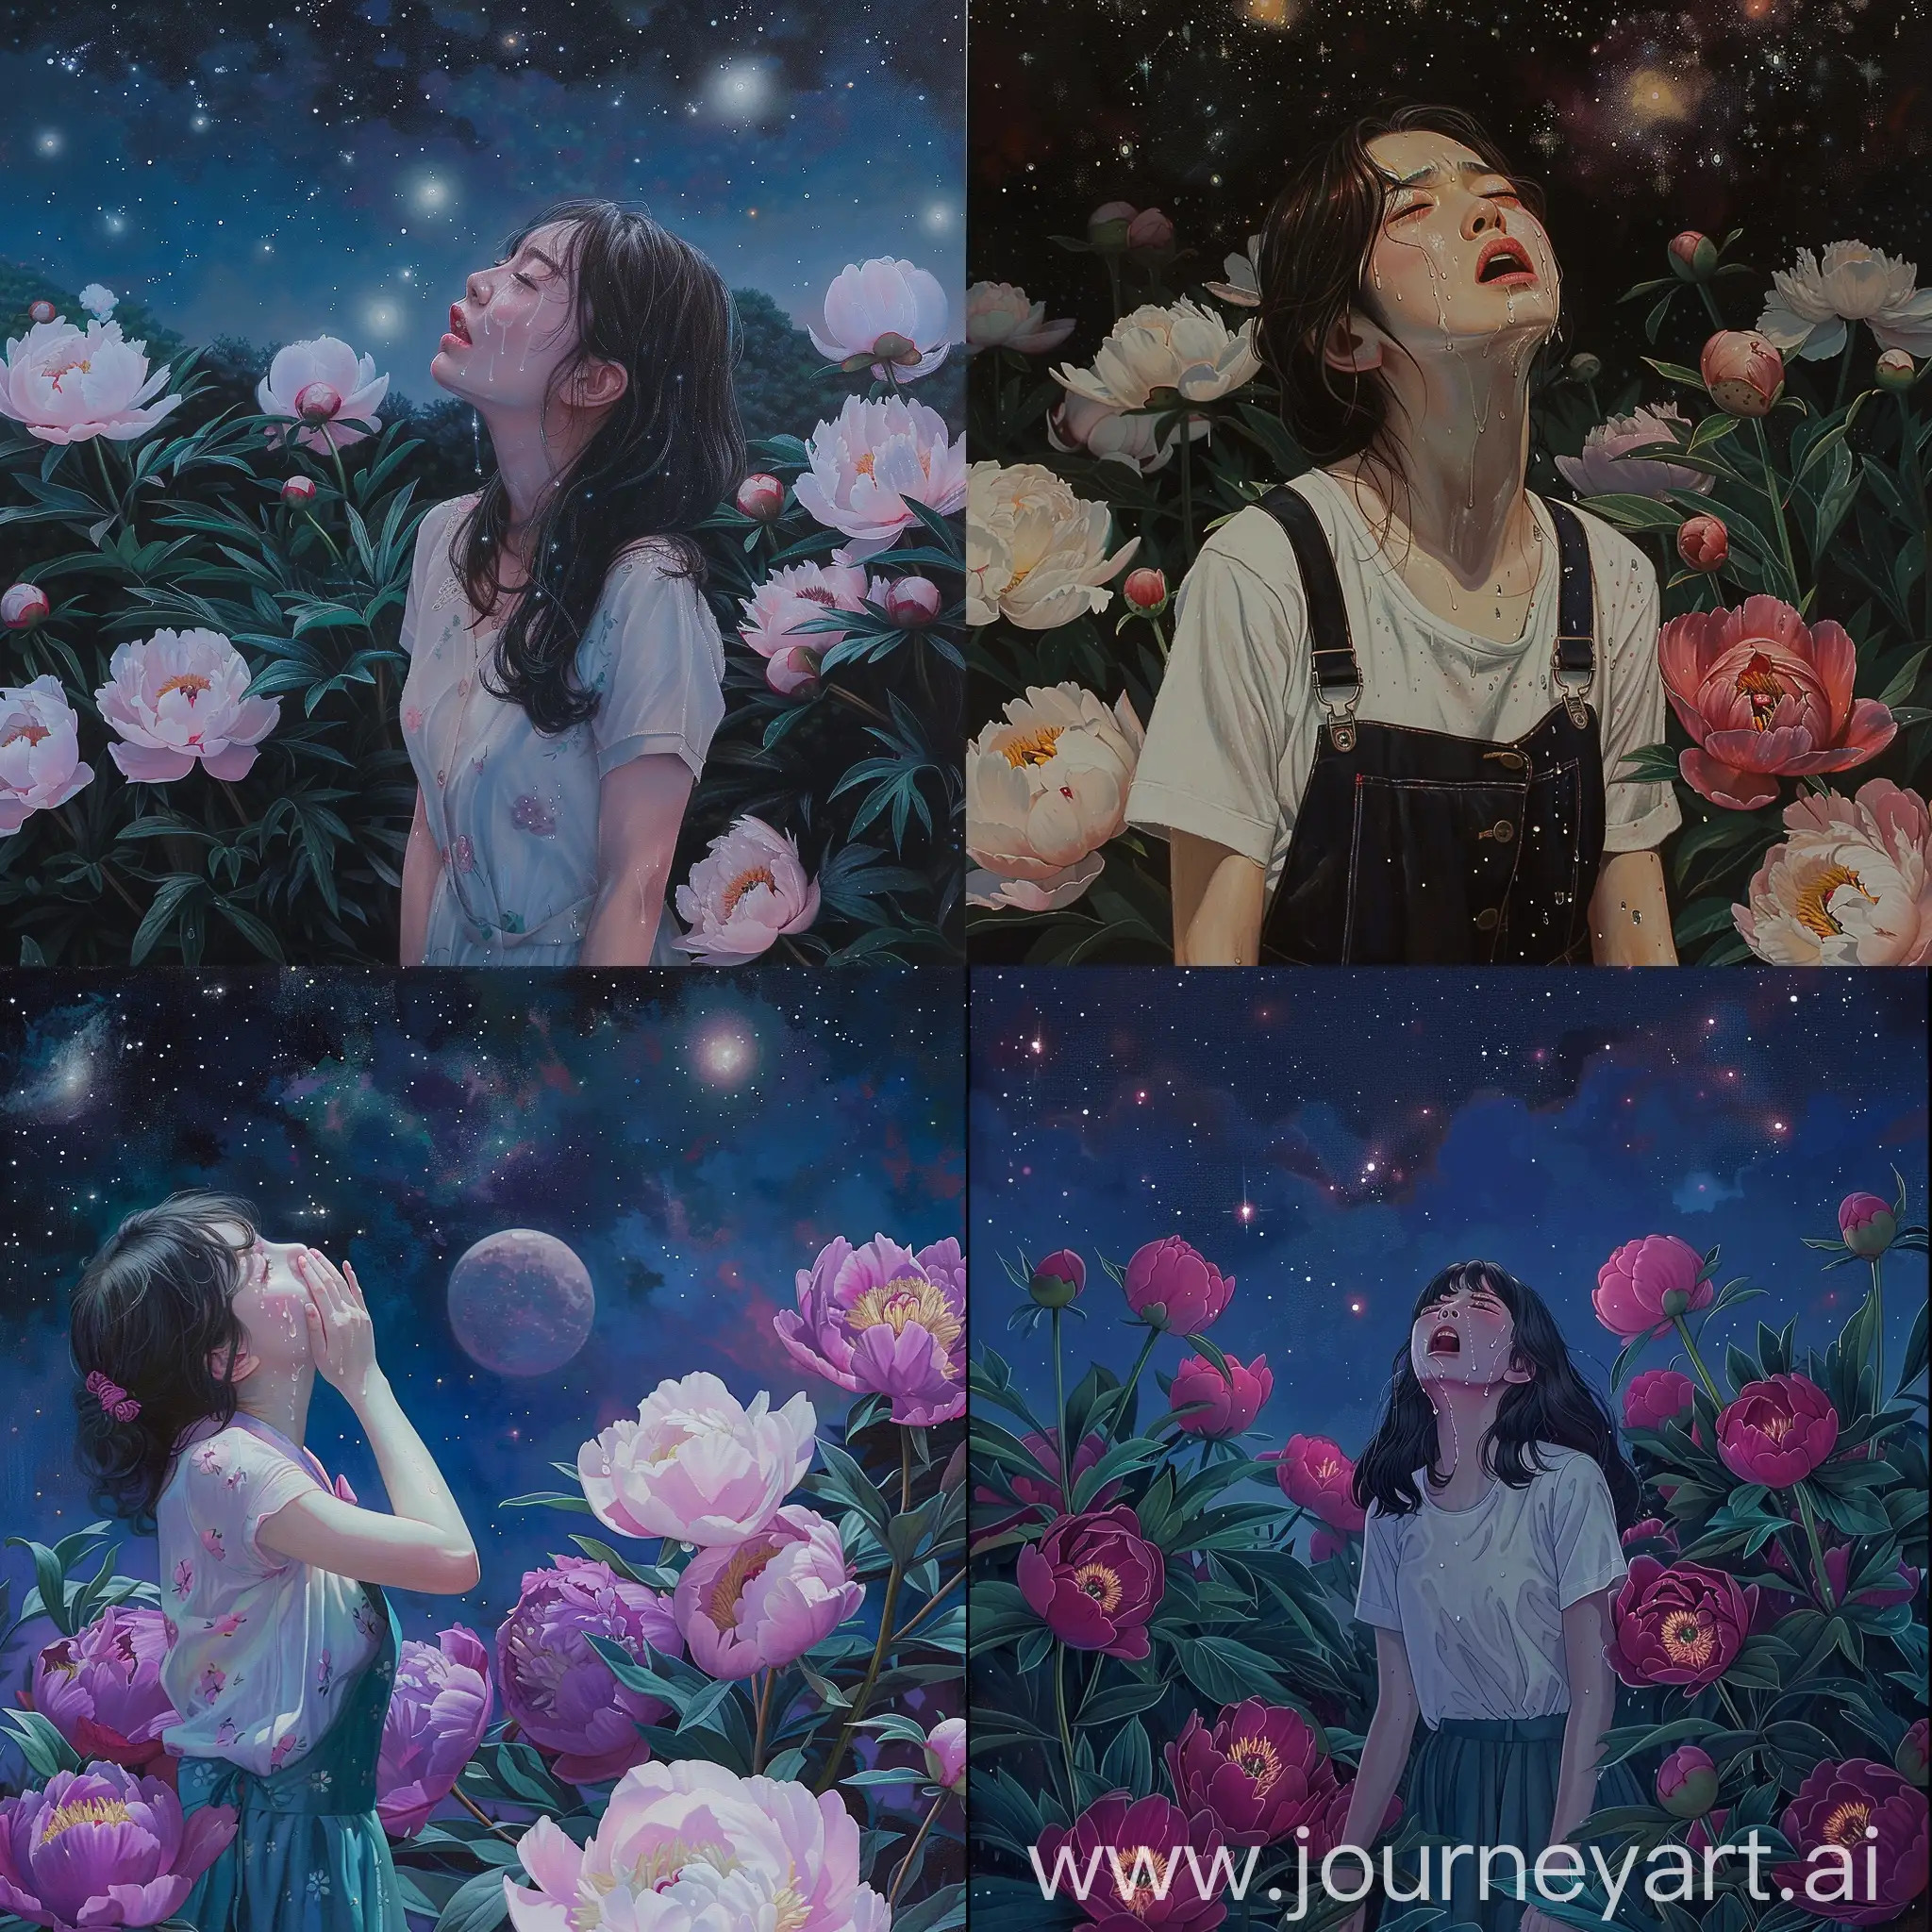 Korean-Idol-Girl-Crying-in-Night-Garden-with-Bright-Stars-and-Peonies